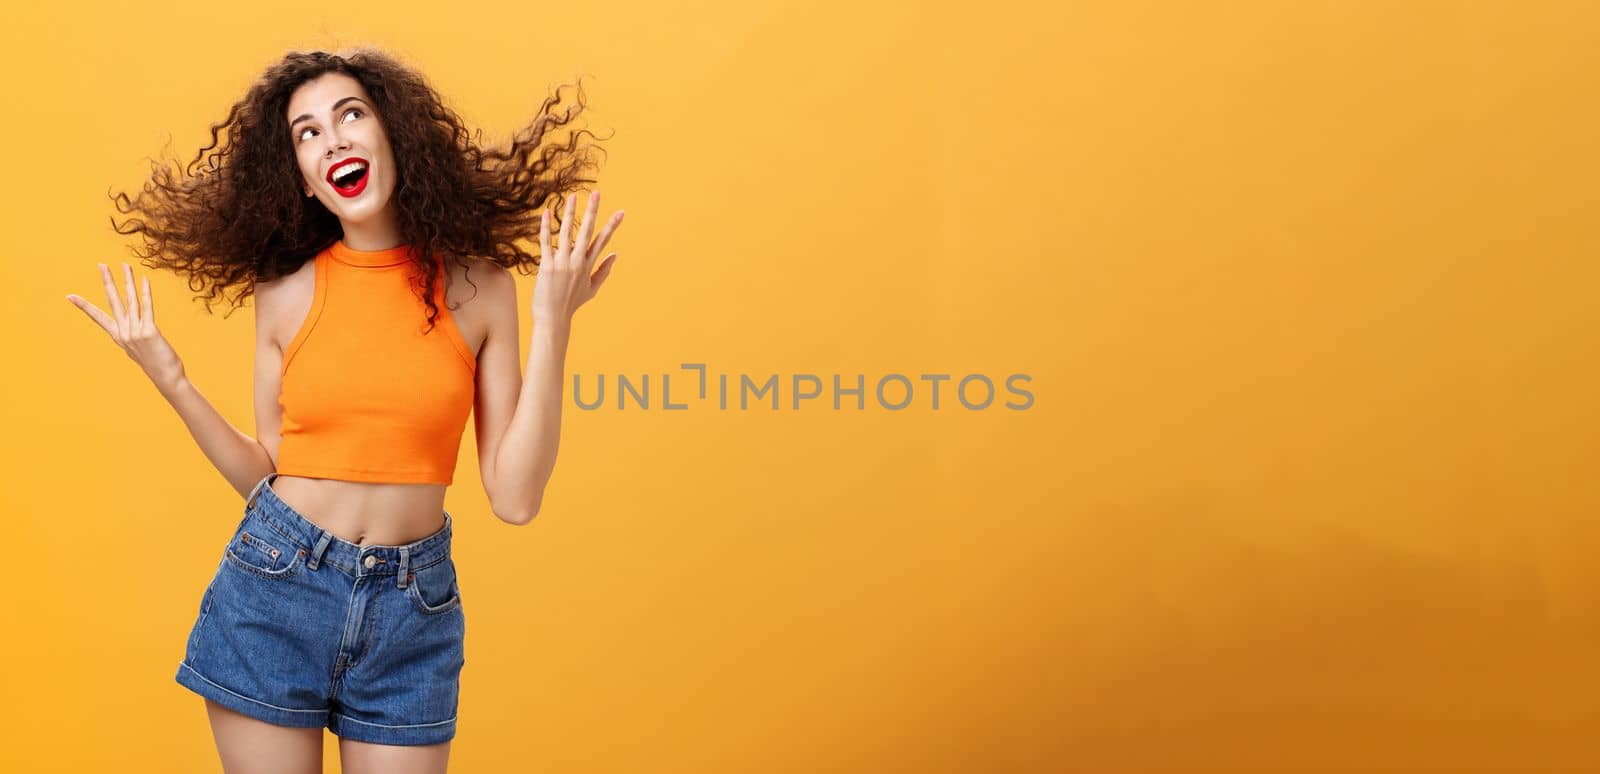 Portrait of silly positive and energized cute female. with curly hairstyle in cropped top flicking hair strand and smiling charming gazing at upper right corner dreamy posing happy over orange wall.